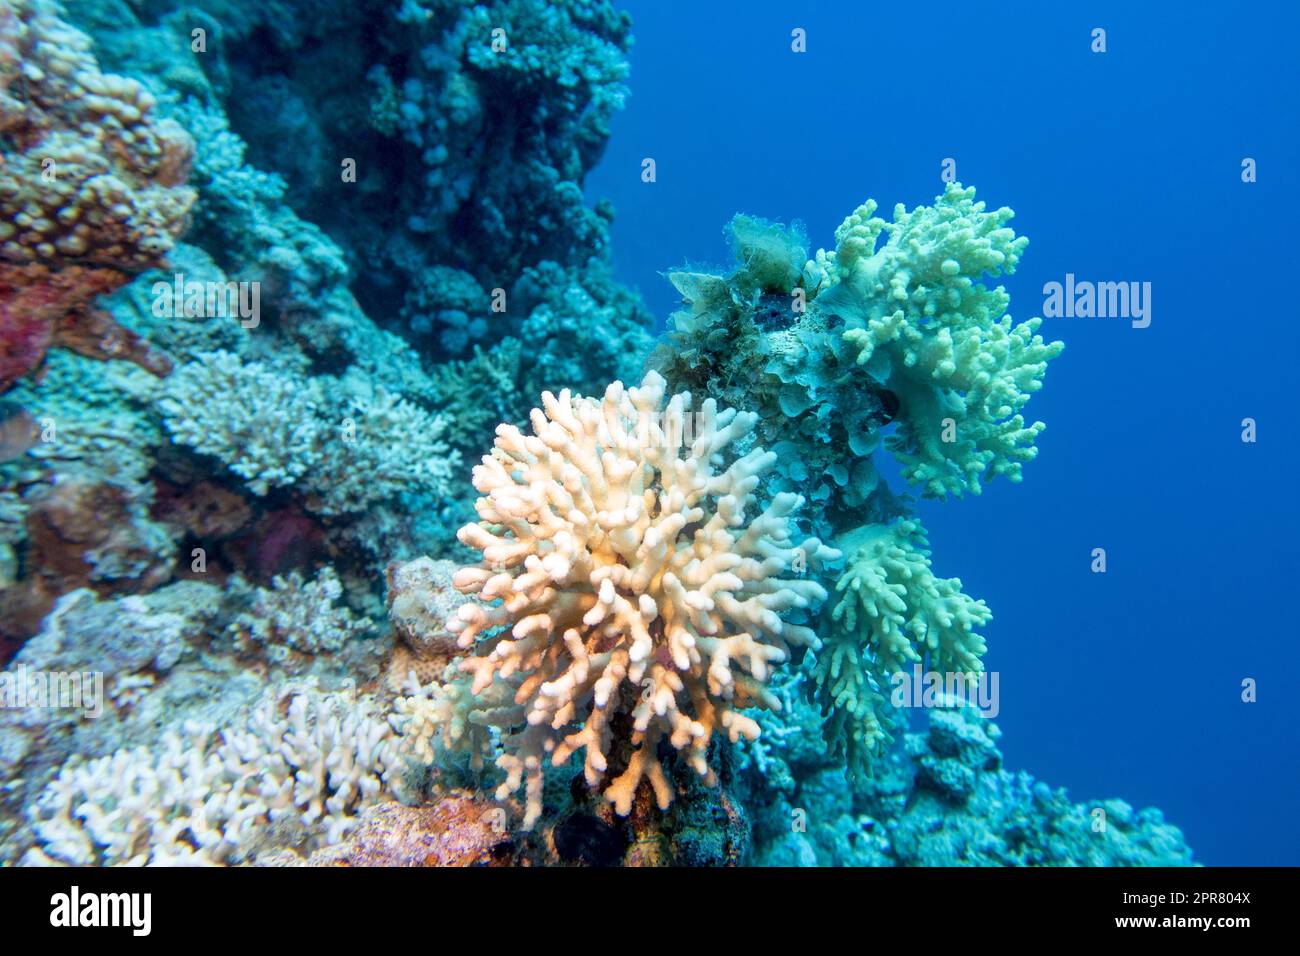 Colorful coral reef at the bottom of tropical sea, white finger coral, underwater landscape Stock Photo